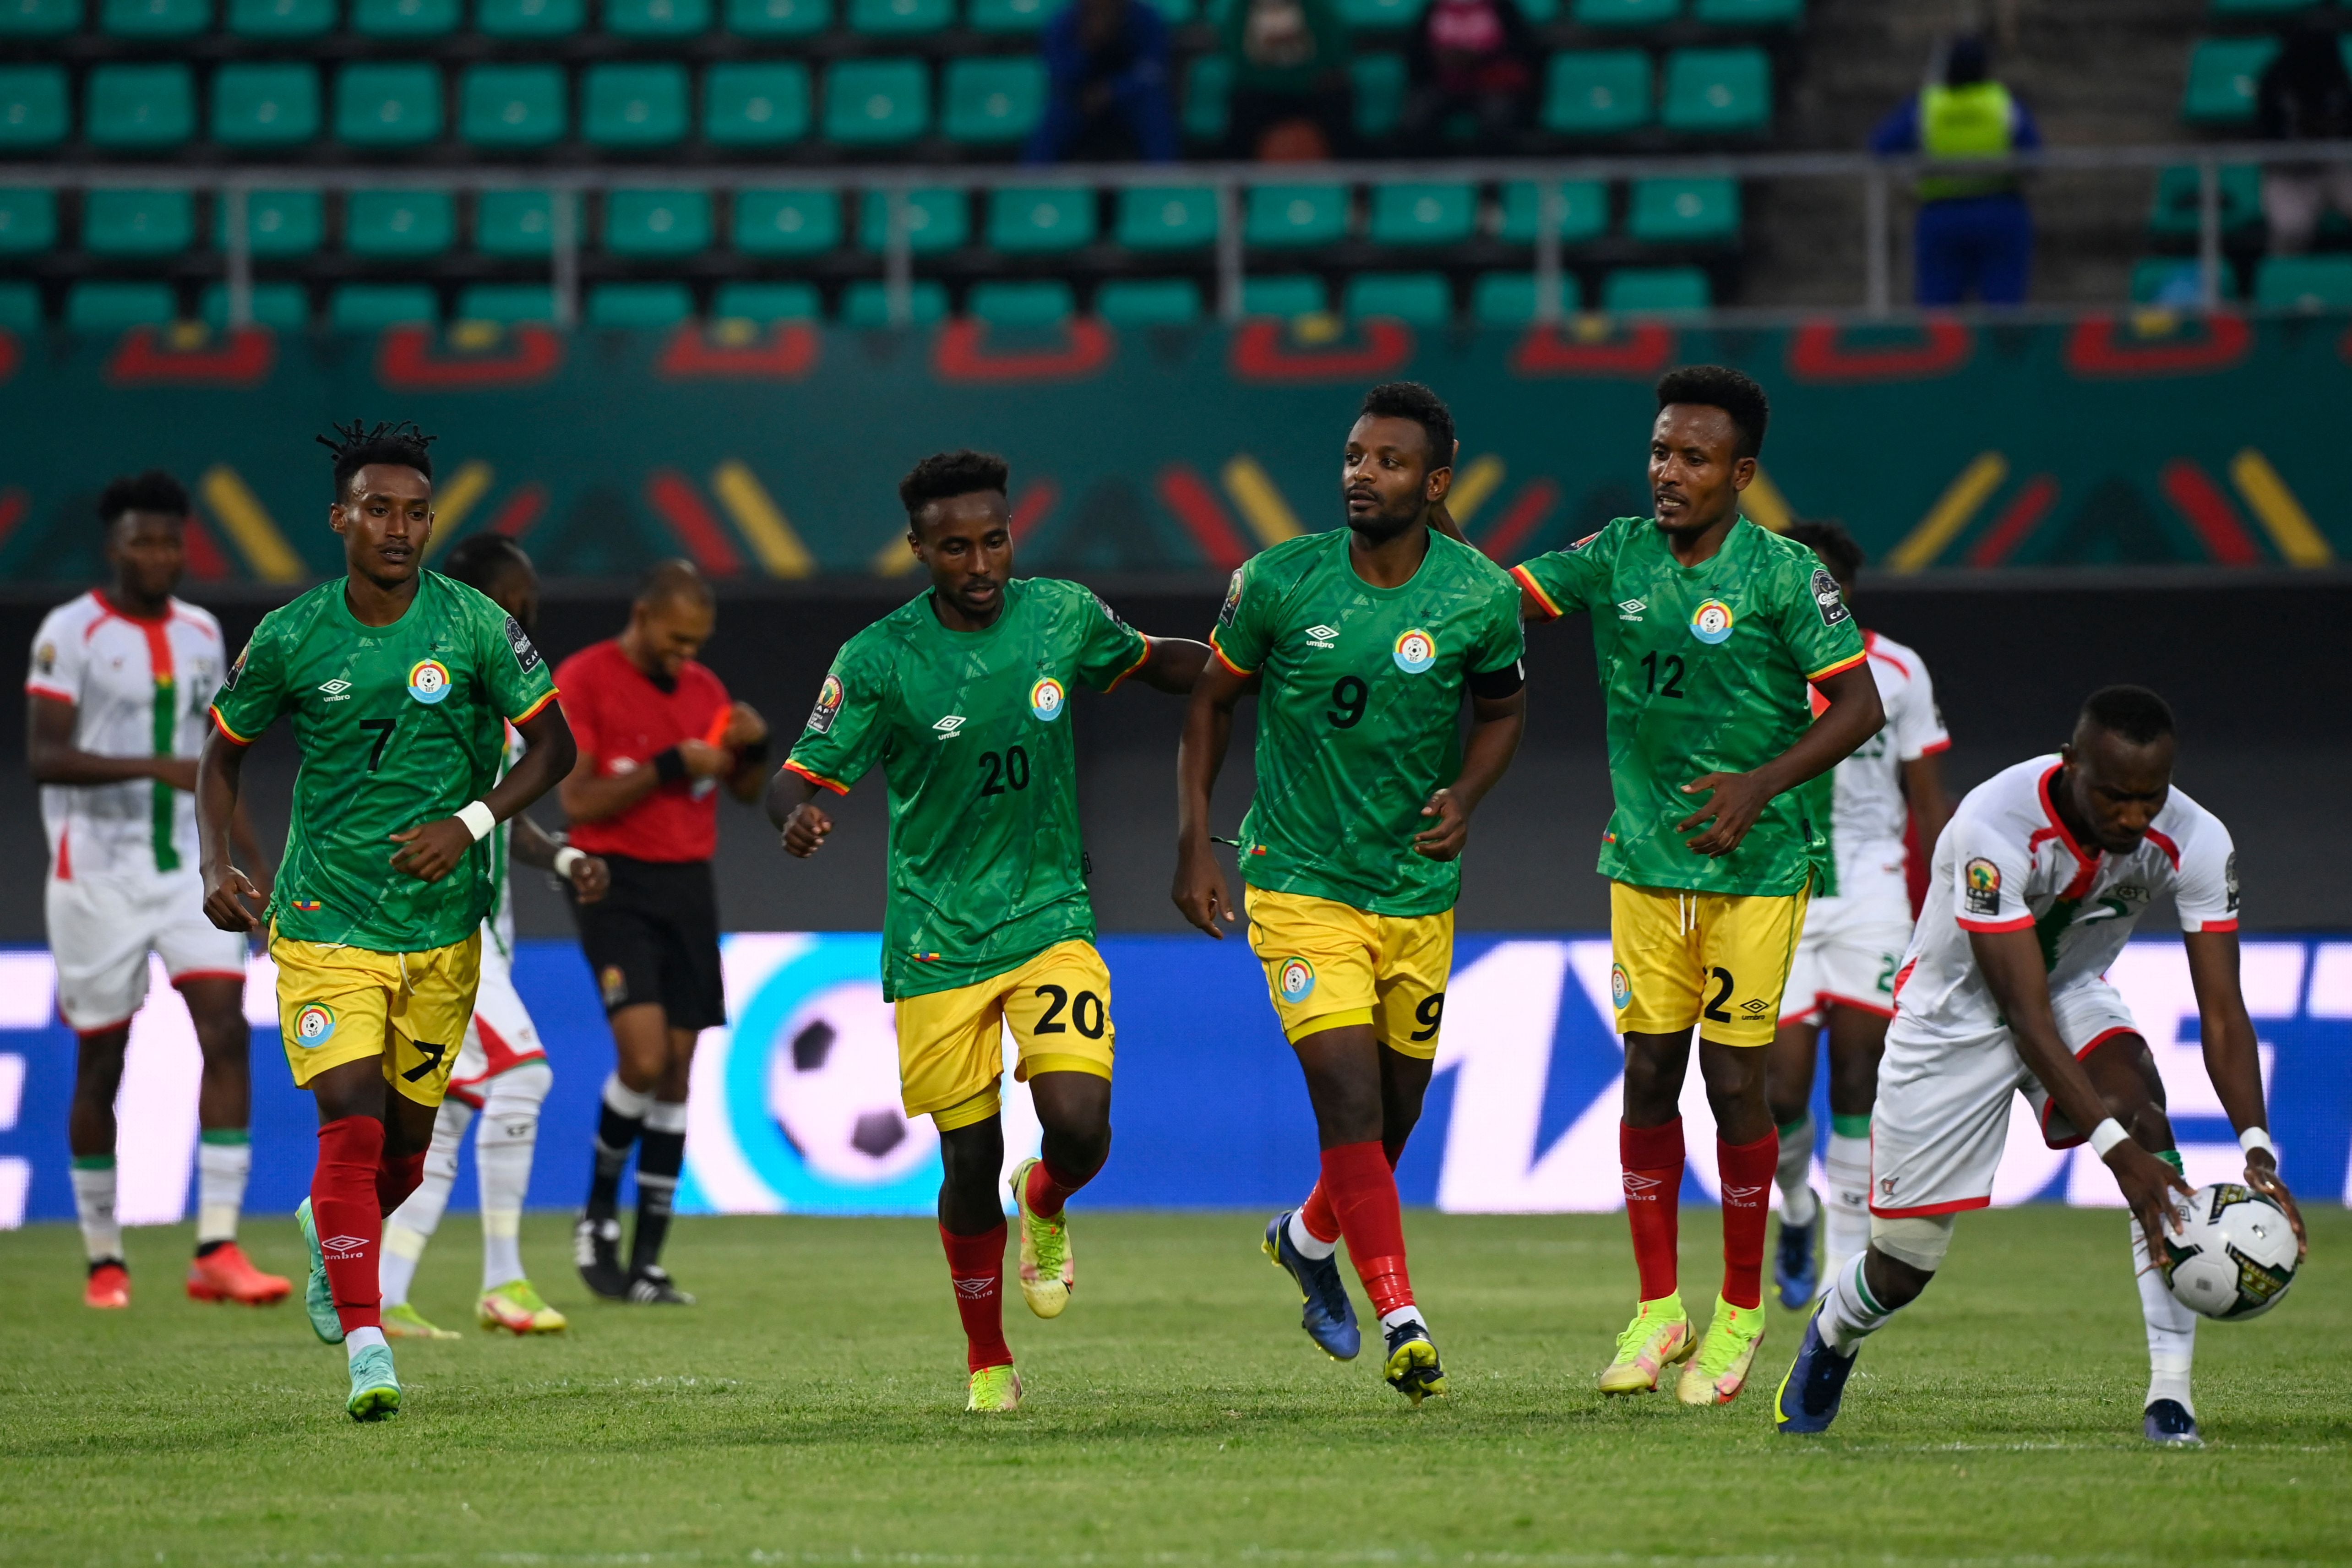 Ethiopia pulled a goal back to claim their first point of the tournament